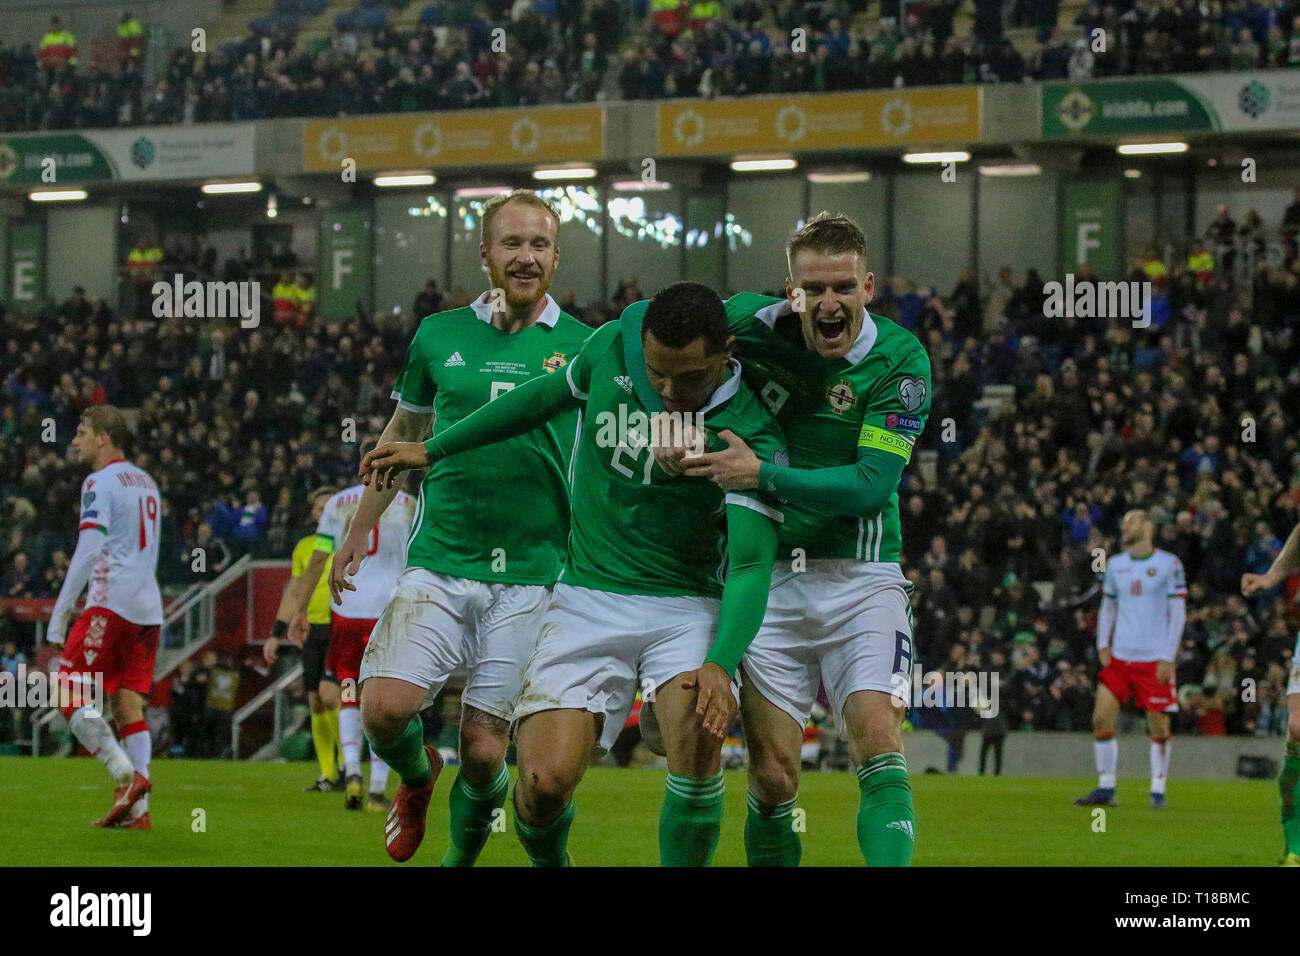 National Football Stadium at Windsor Park, Belfast, Northern Ireland. 24  March 2019. UEFA EURO 2020 Qualifier- Northern Ireland v Belarus. Action from tonight's game. Josh Magennis (21) celebrates his winner for Northern Ireland with Steven Davis (8) and Liam Boyce (9). Credit: David Hunter/Alamy Live News. Stock Photo